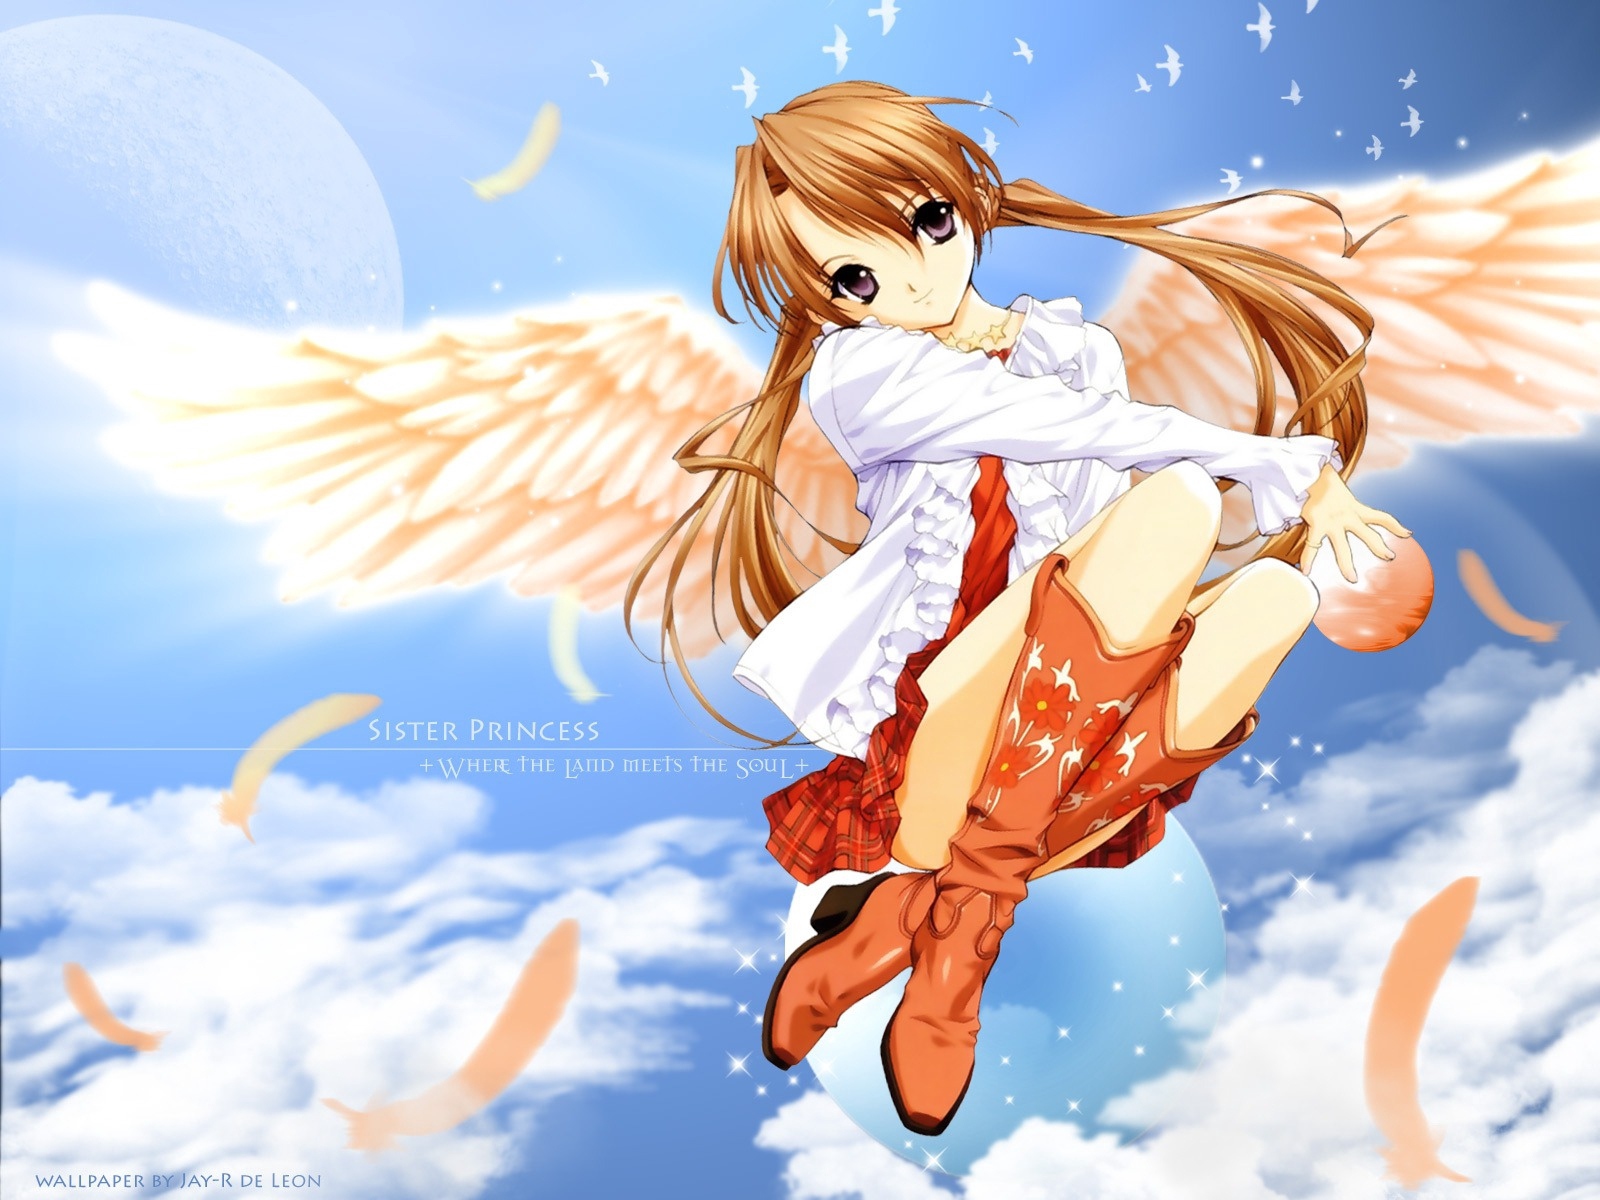 Anime Girls With Angel Wings